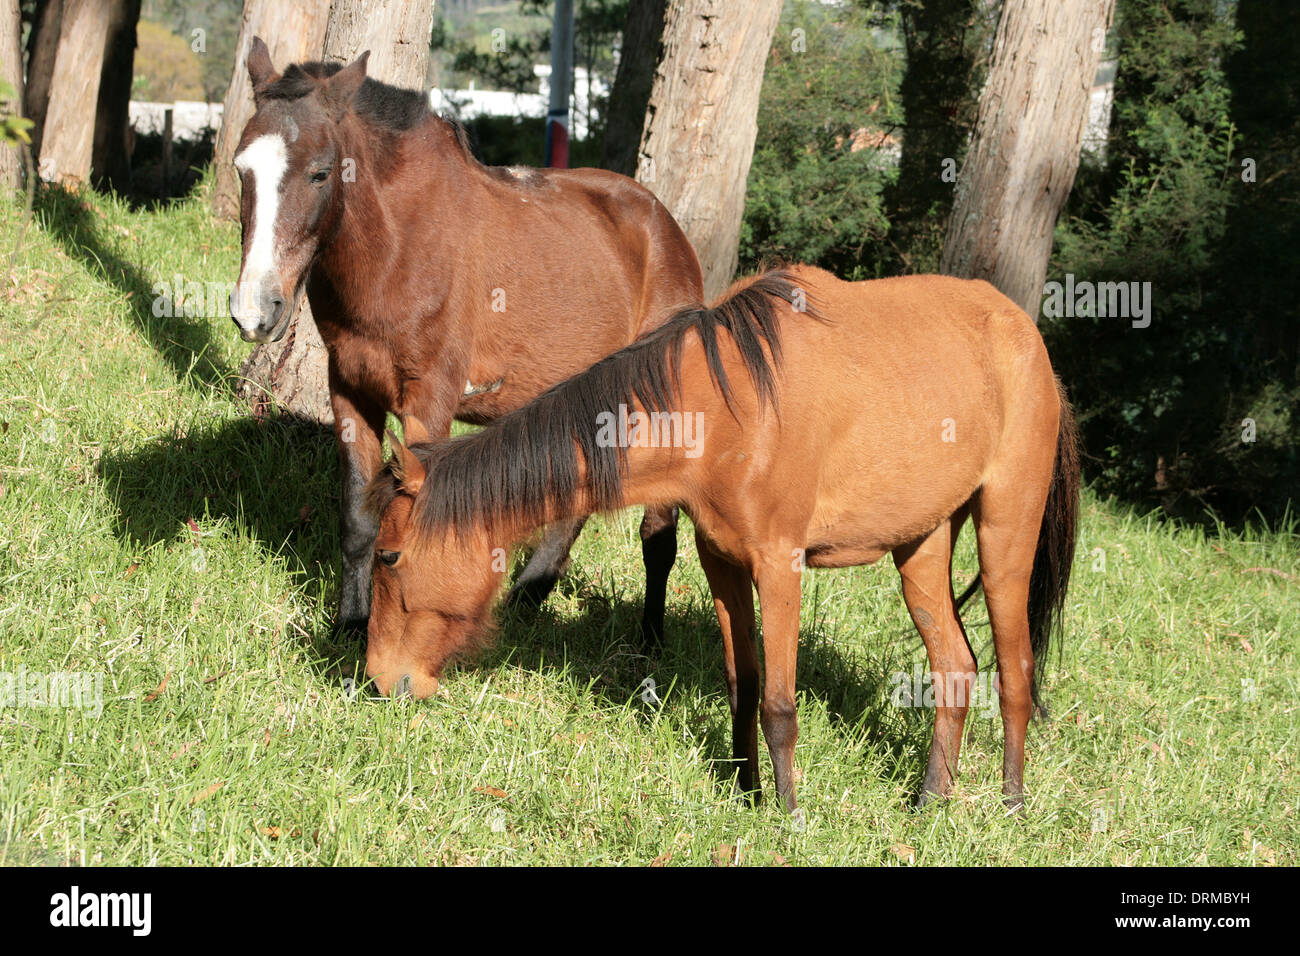 A brown horse standing in a farmers pasture in Cotacachi, Ecuador Stock Photo